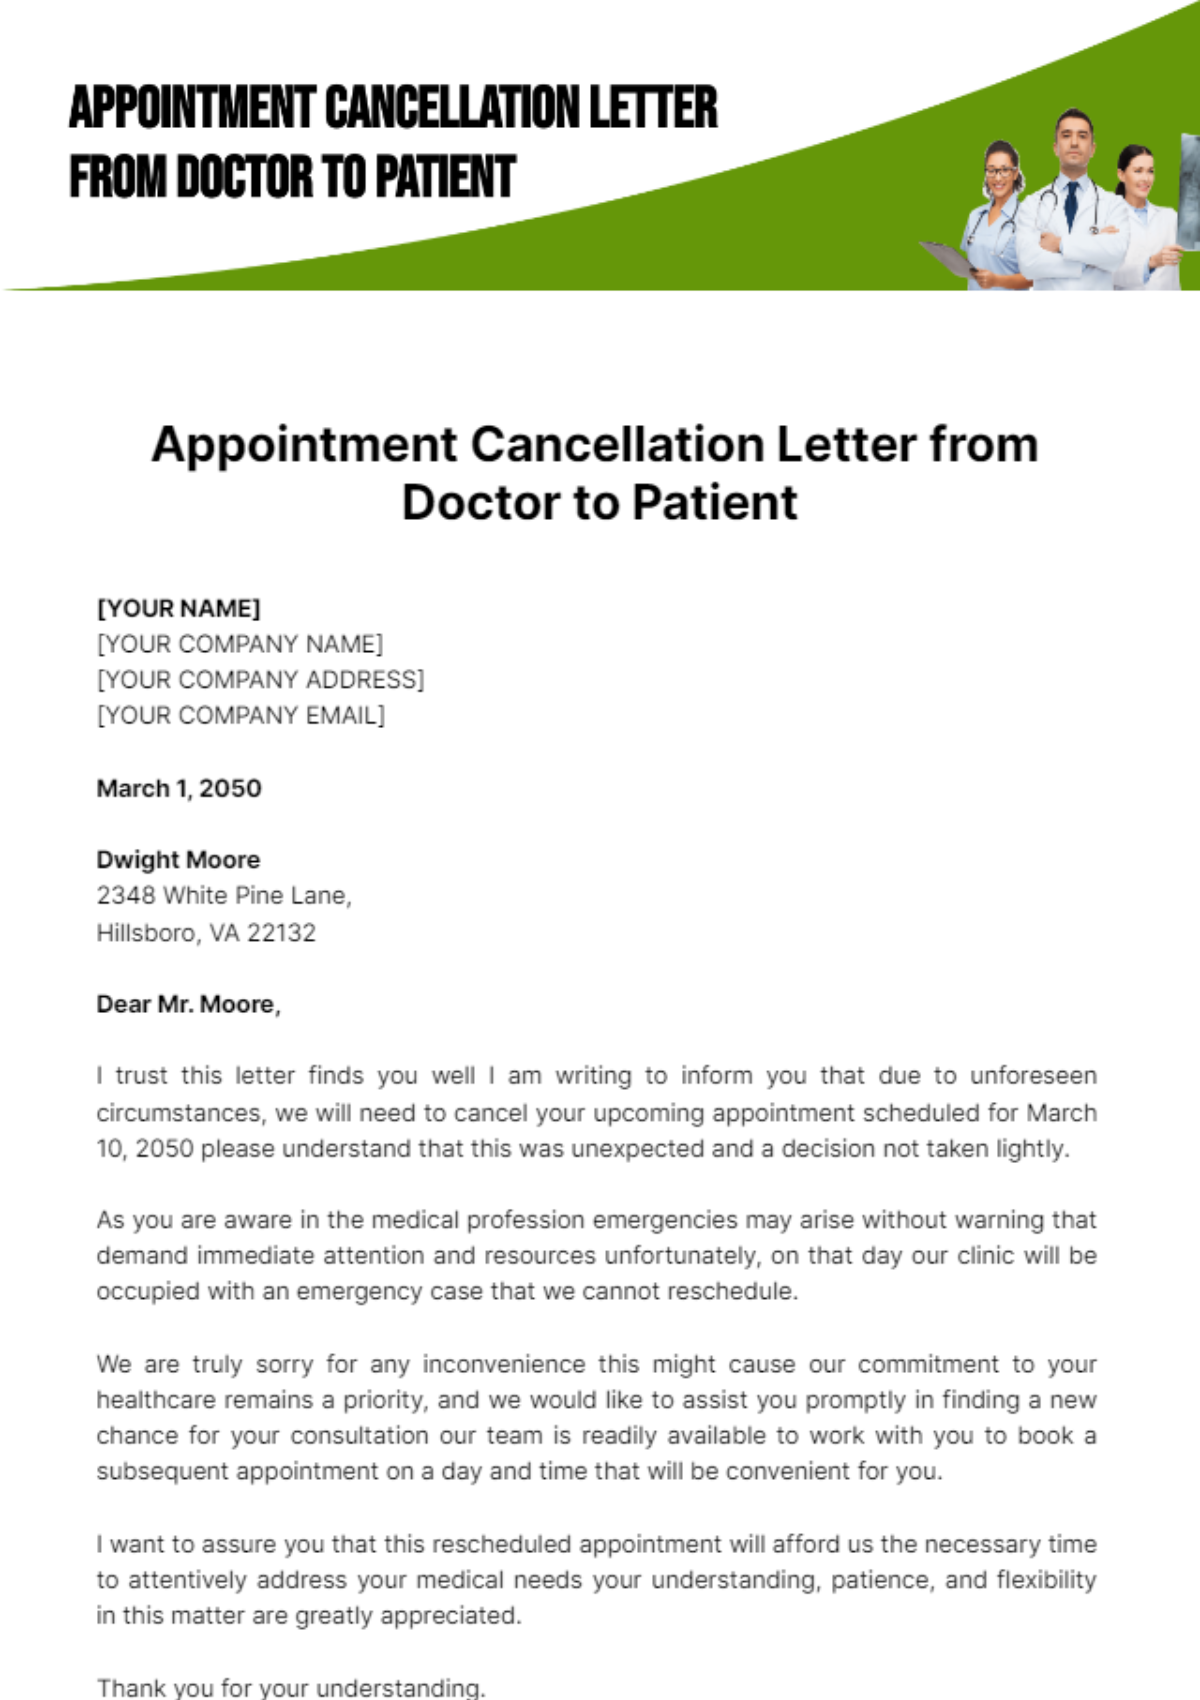 Free Appointment Cancellation Letter from Doctor to Patient Template